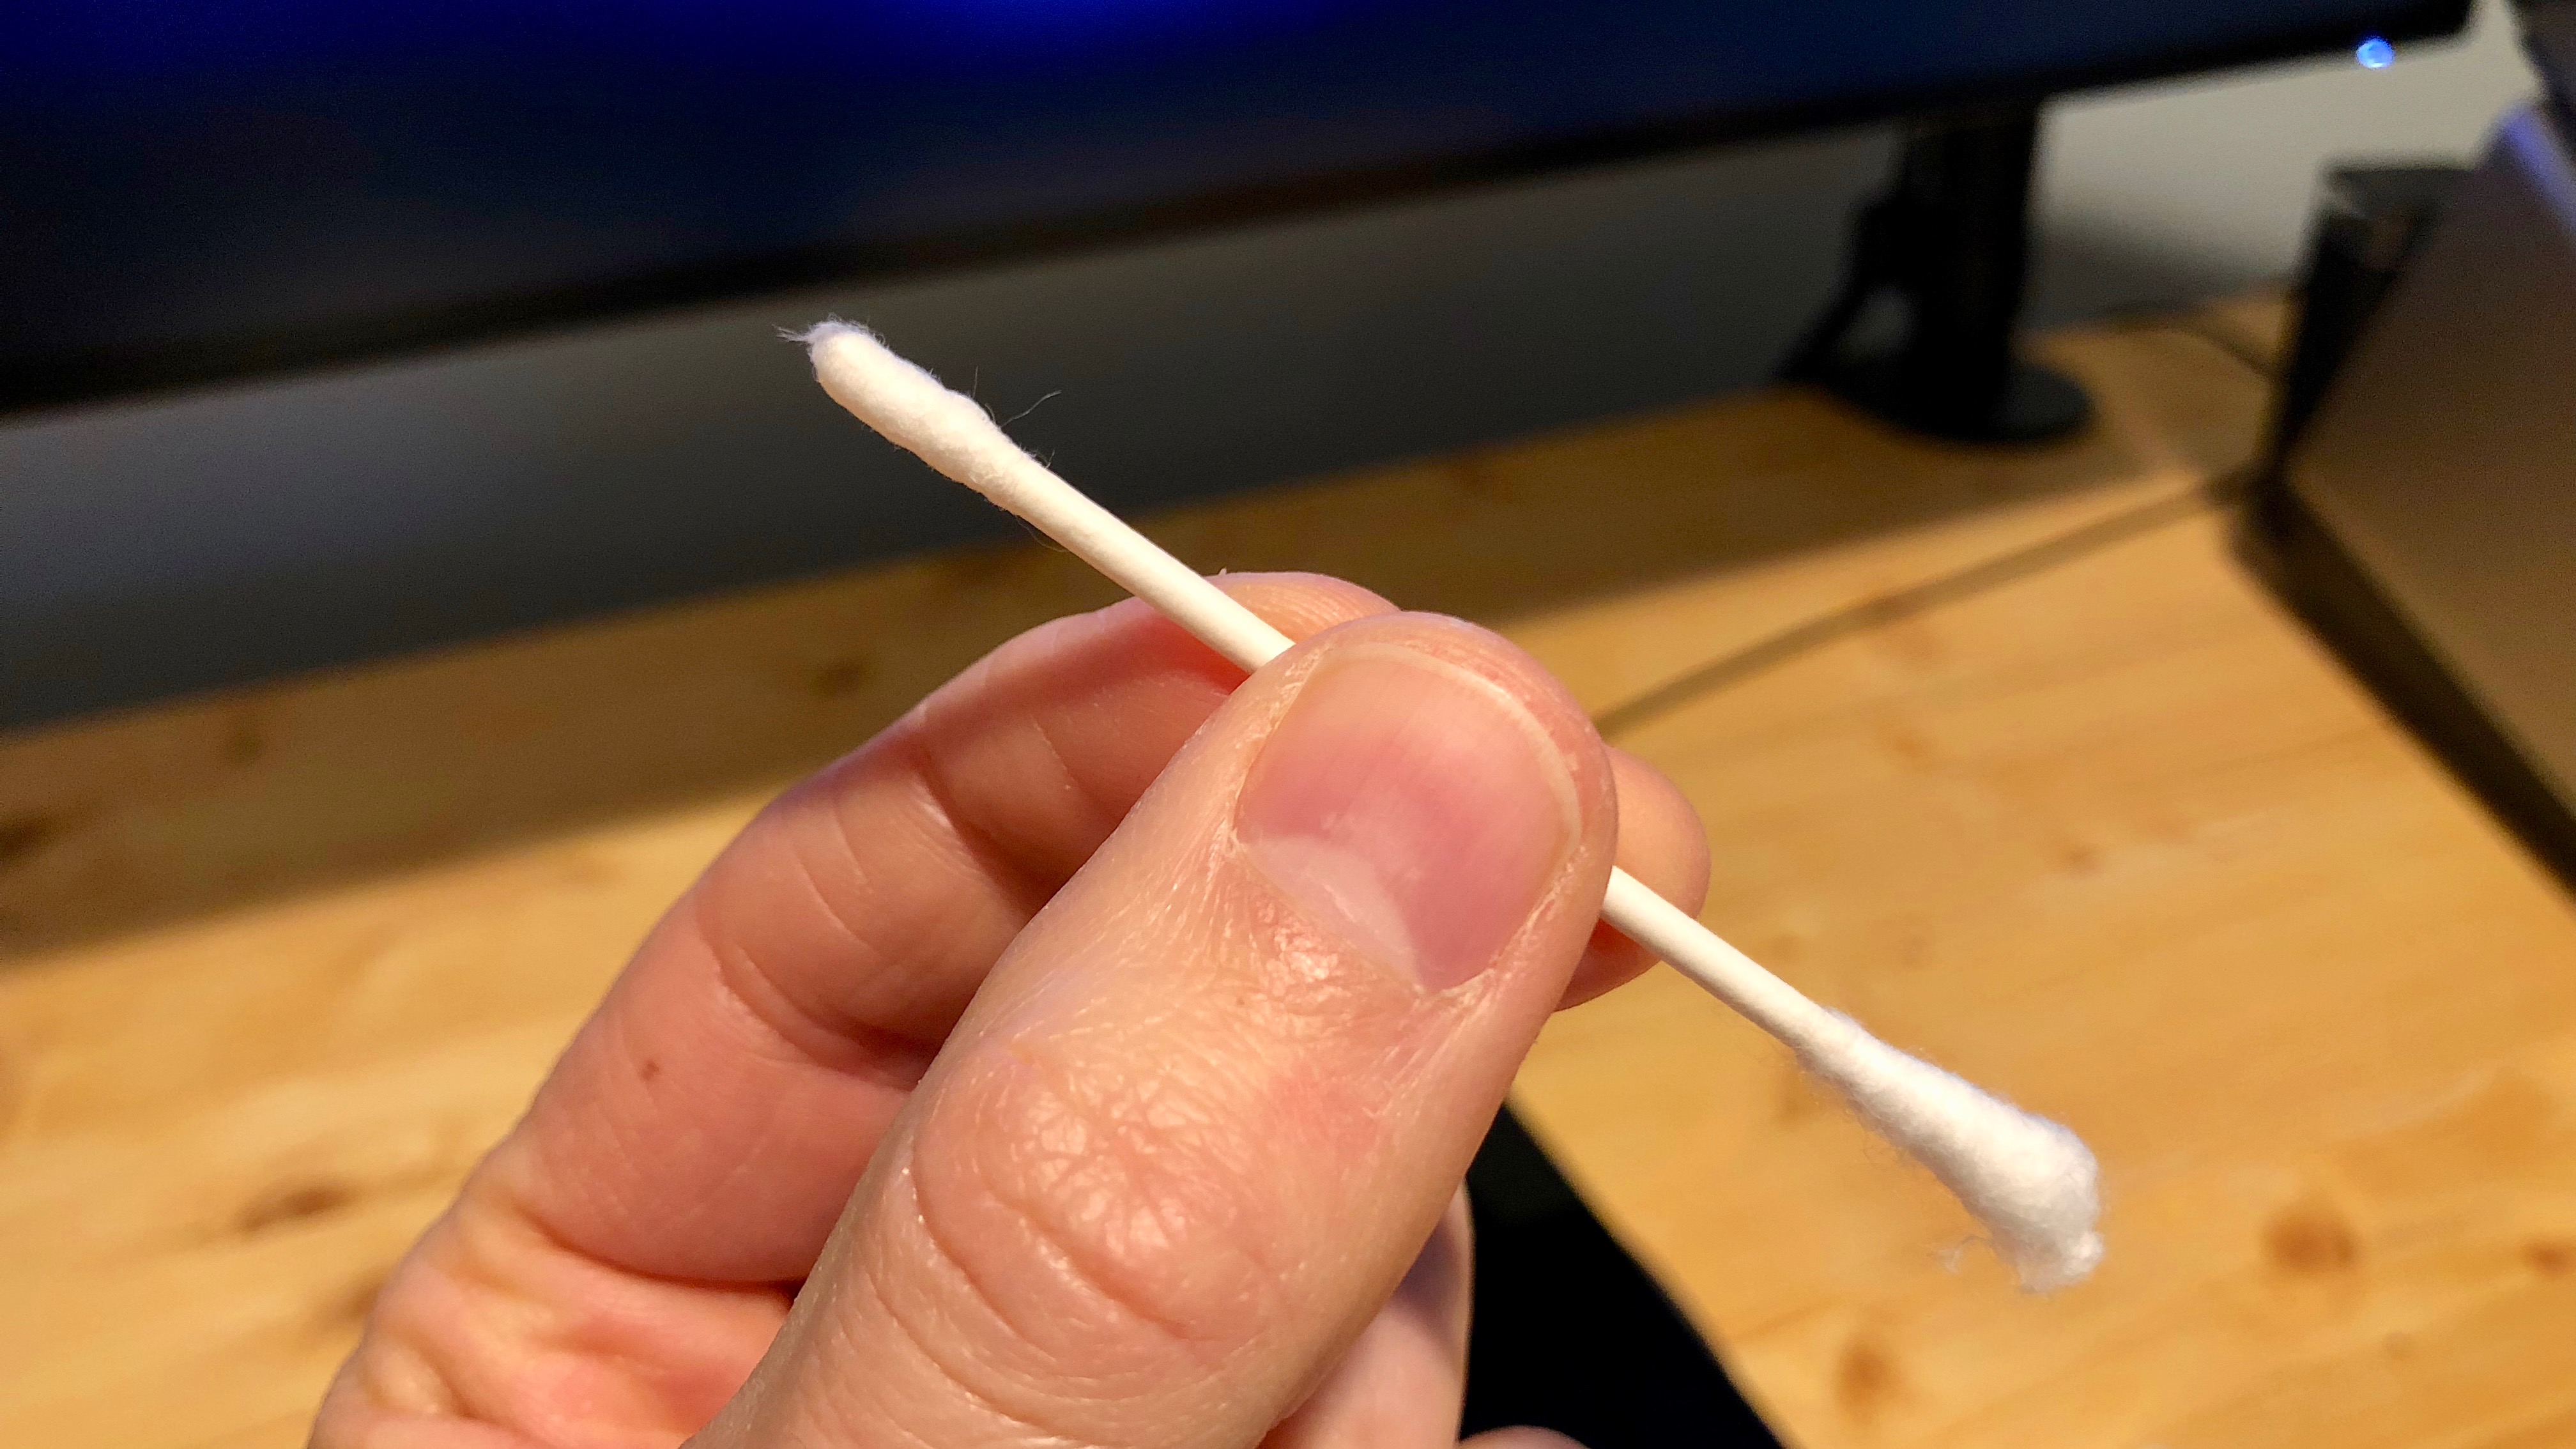 How to clean AirPods - modified Q tip